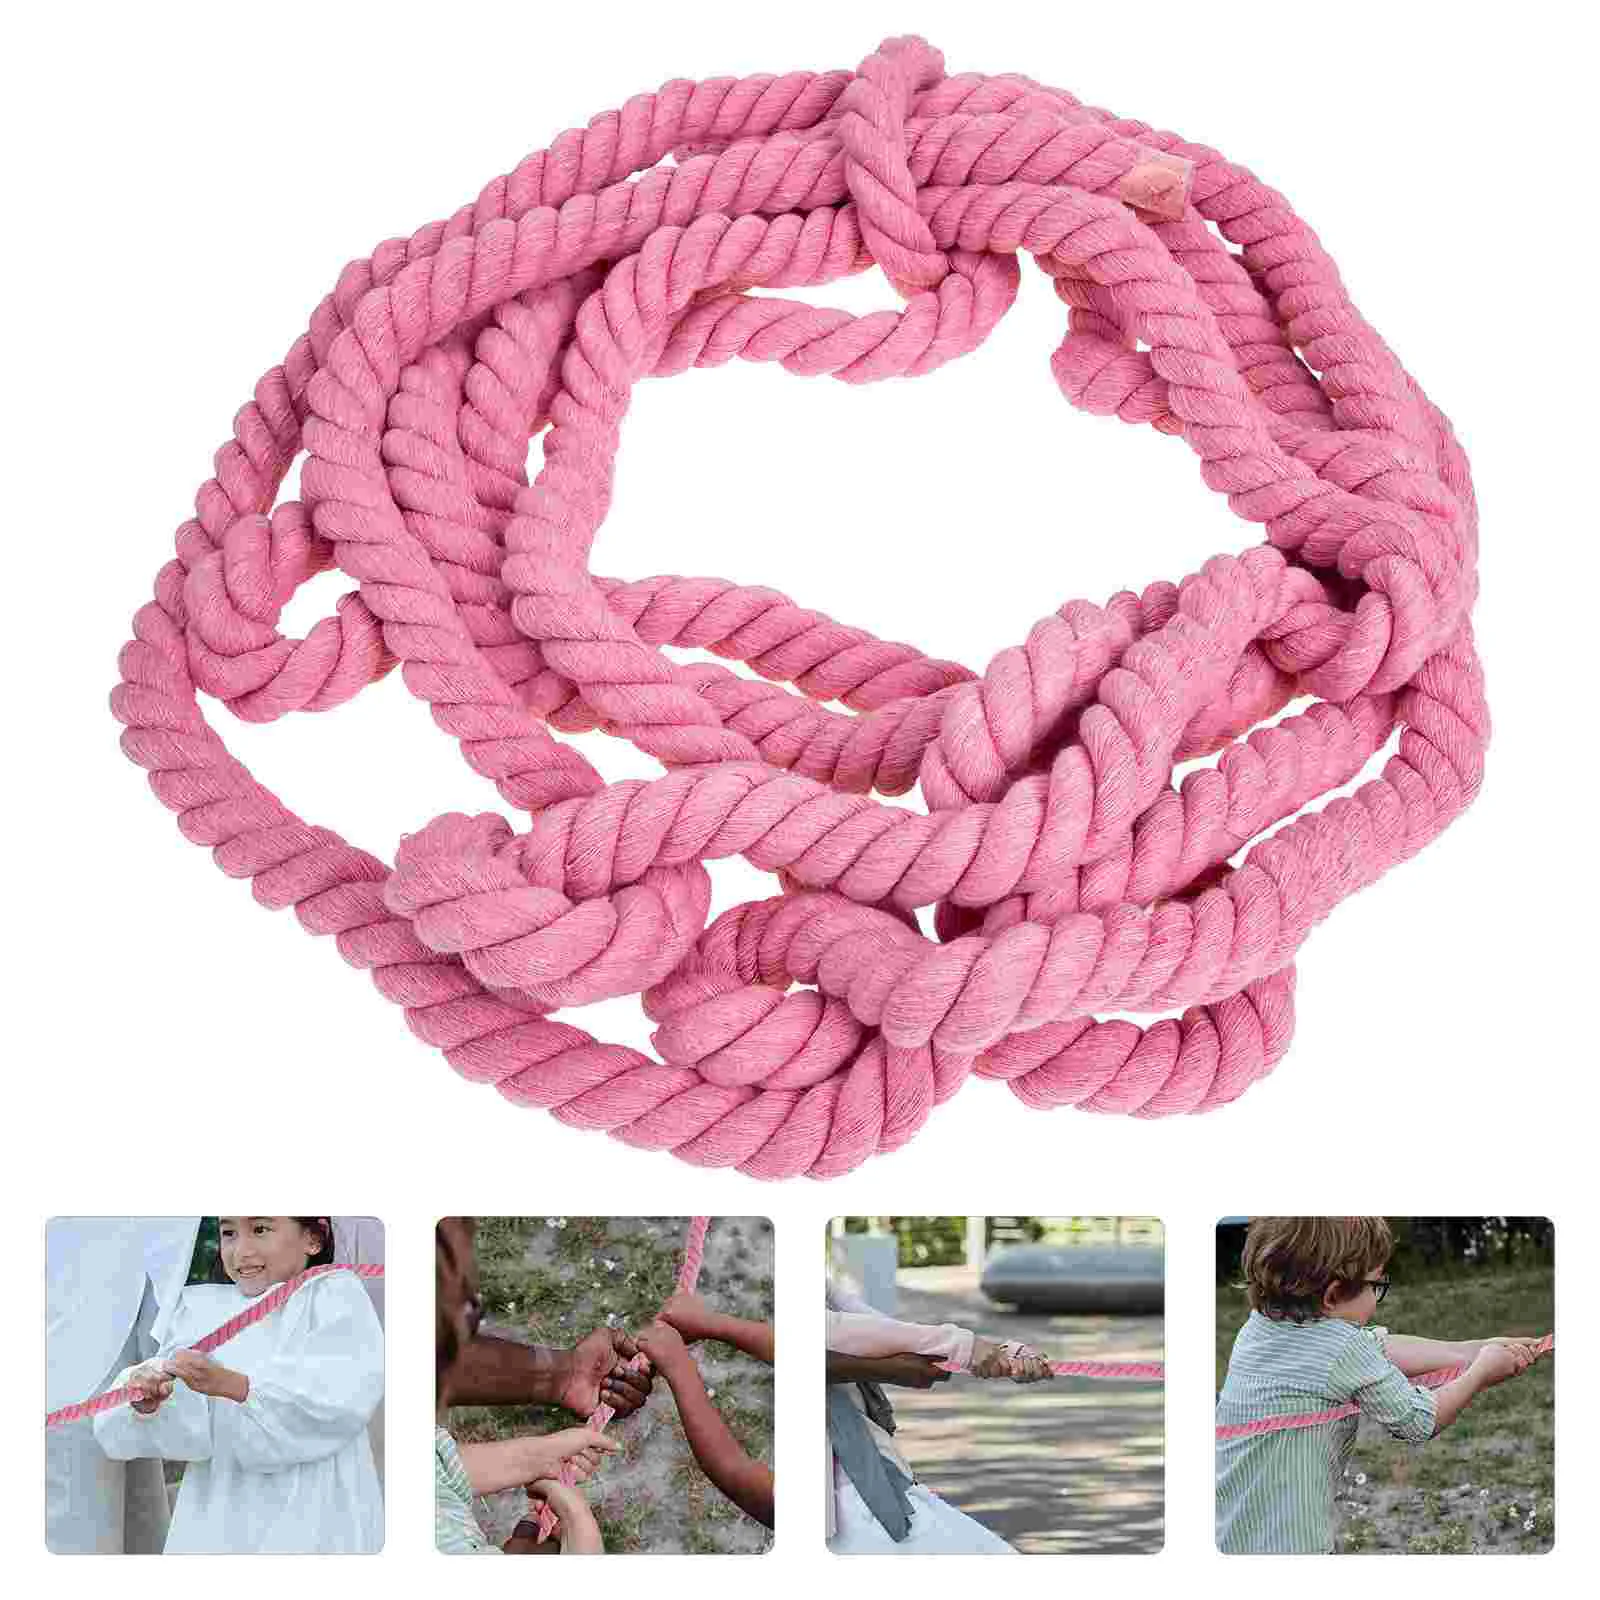 

Tug Of War Rope Triple- Strand Cotton Rope Durable Twisted Cotton For Field Day Games Toys Team Building Activities Family Game